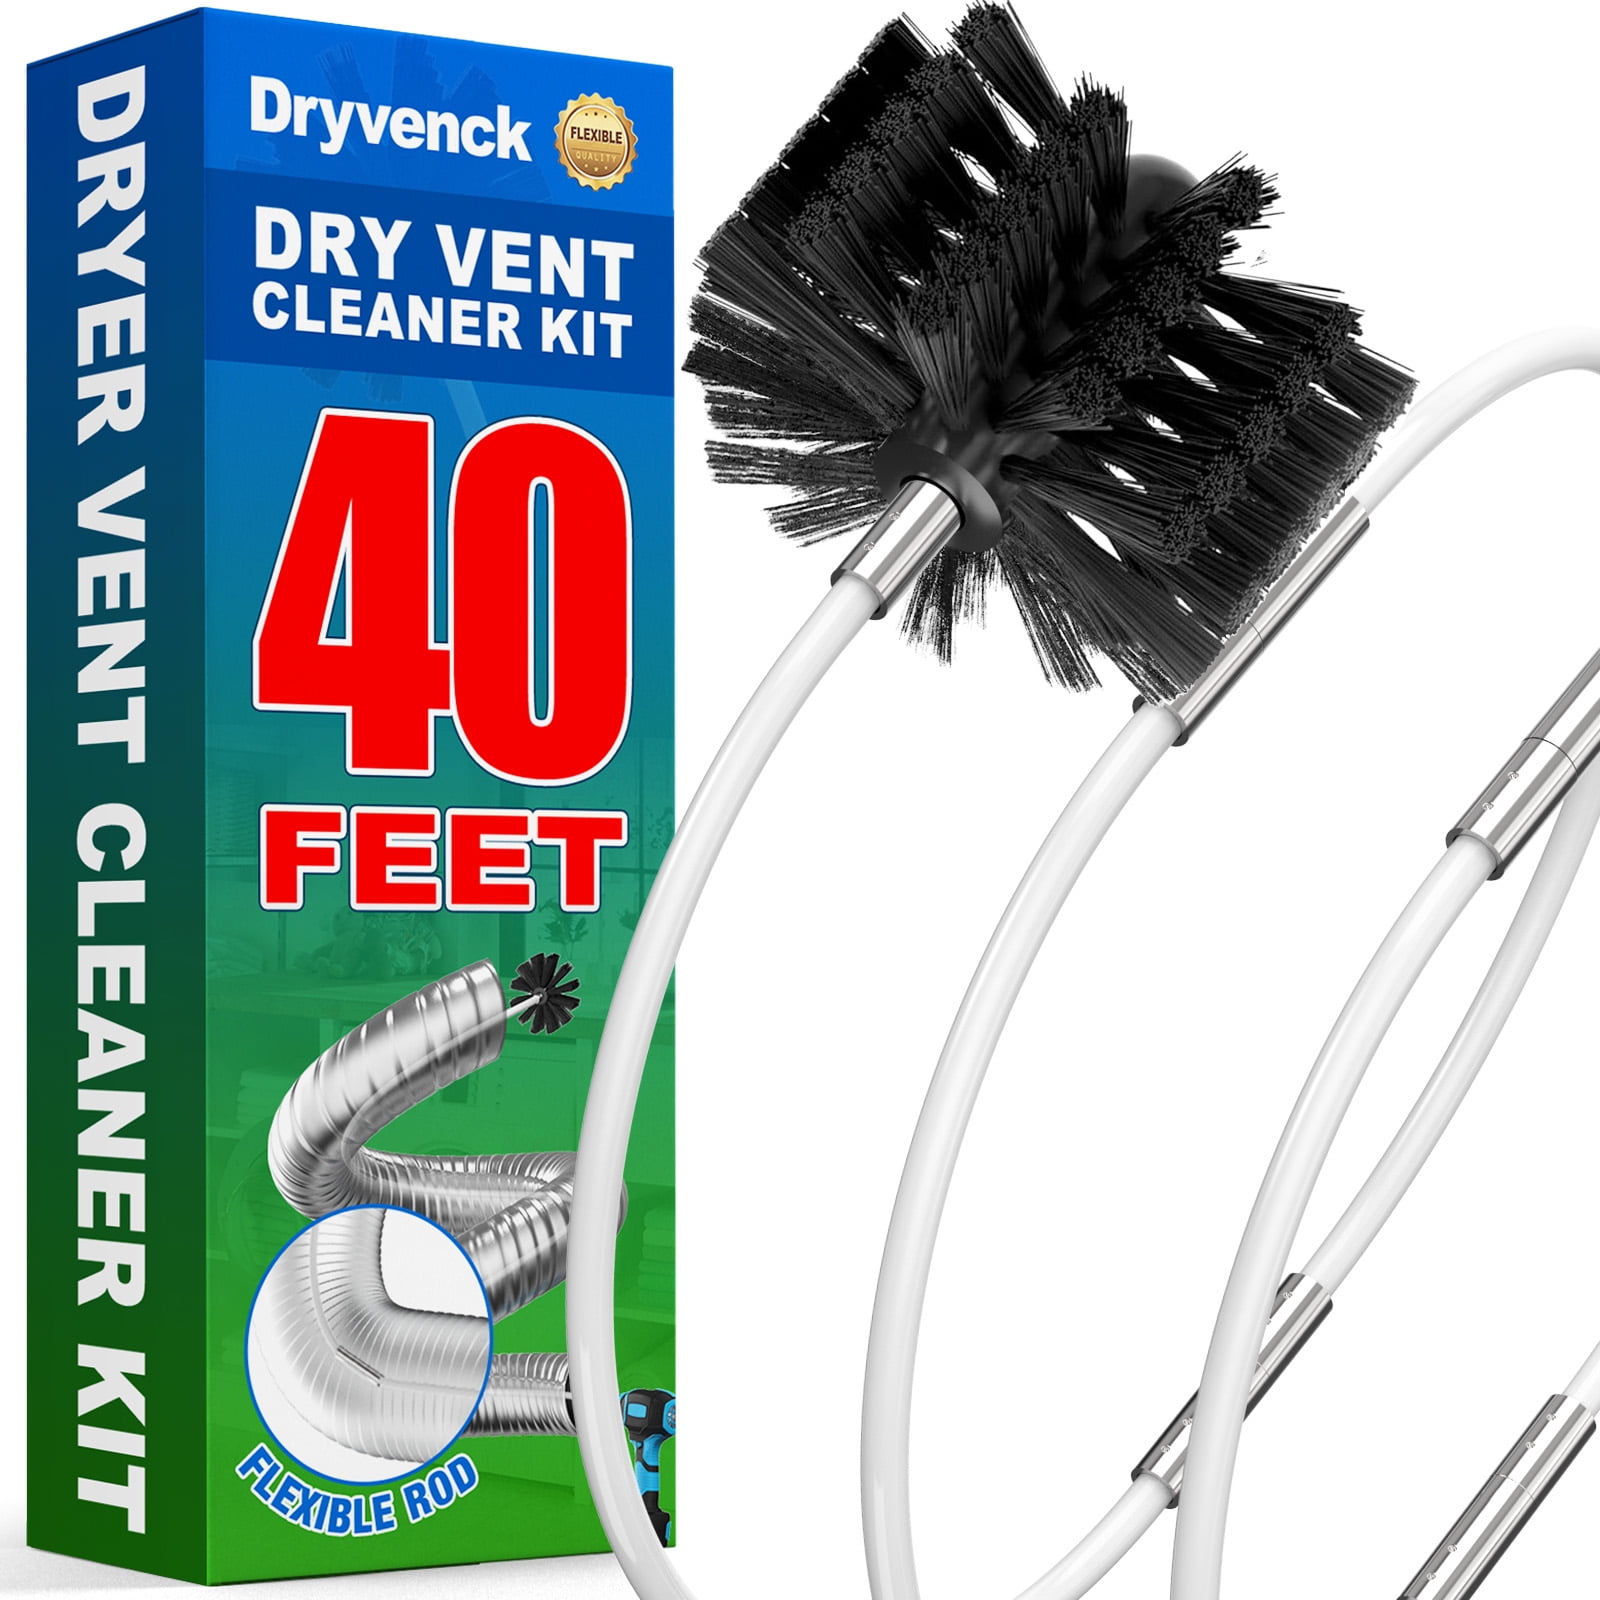 Jandel 2 Pack Dryer Cleaning Kit General Vacuum Hose Attachment Flexible and 30 inch Flexible Dryer Vent Cleaning Brush and Refrigerator Coil Brush, Size